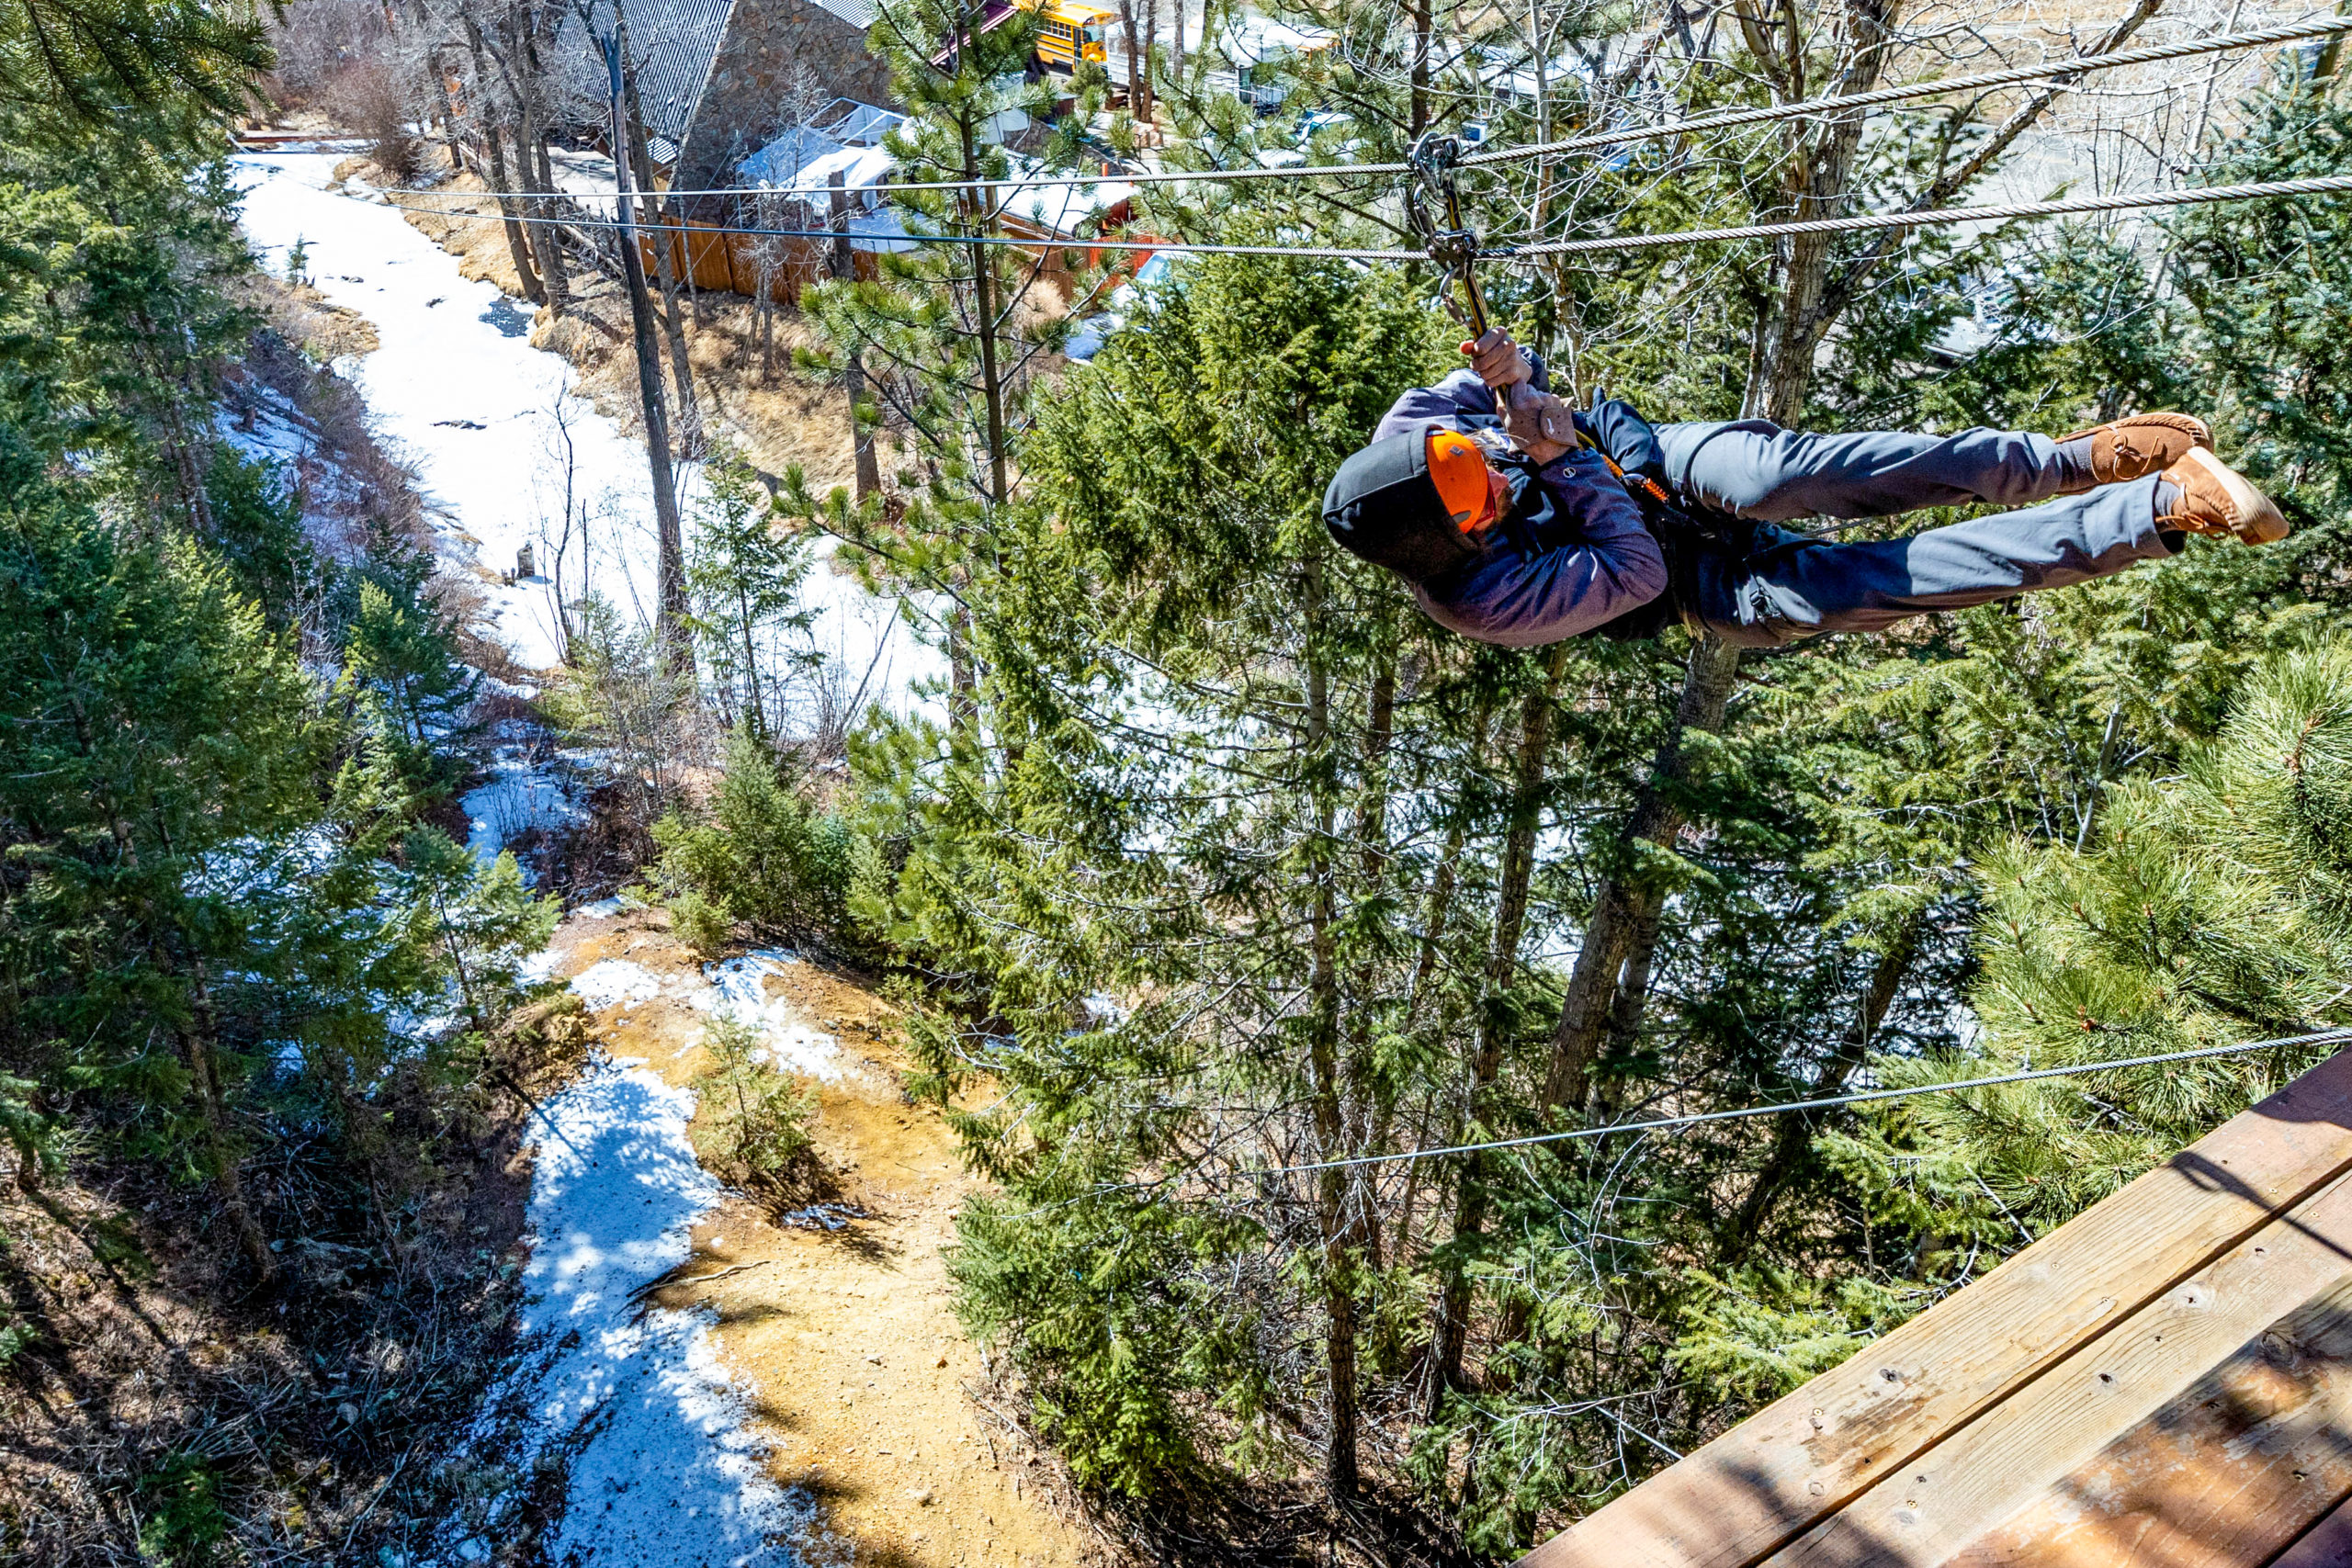 The Cliffside Zipline course with snow